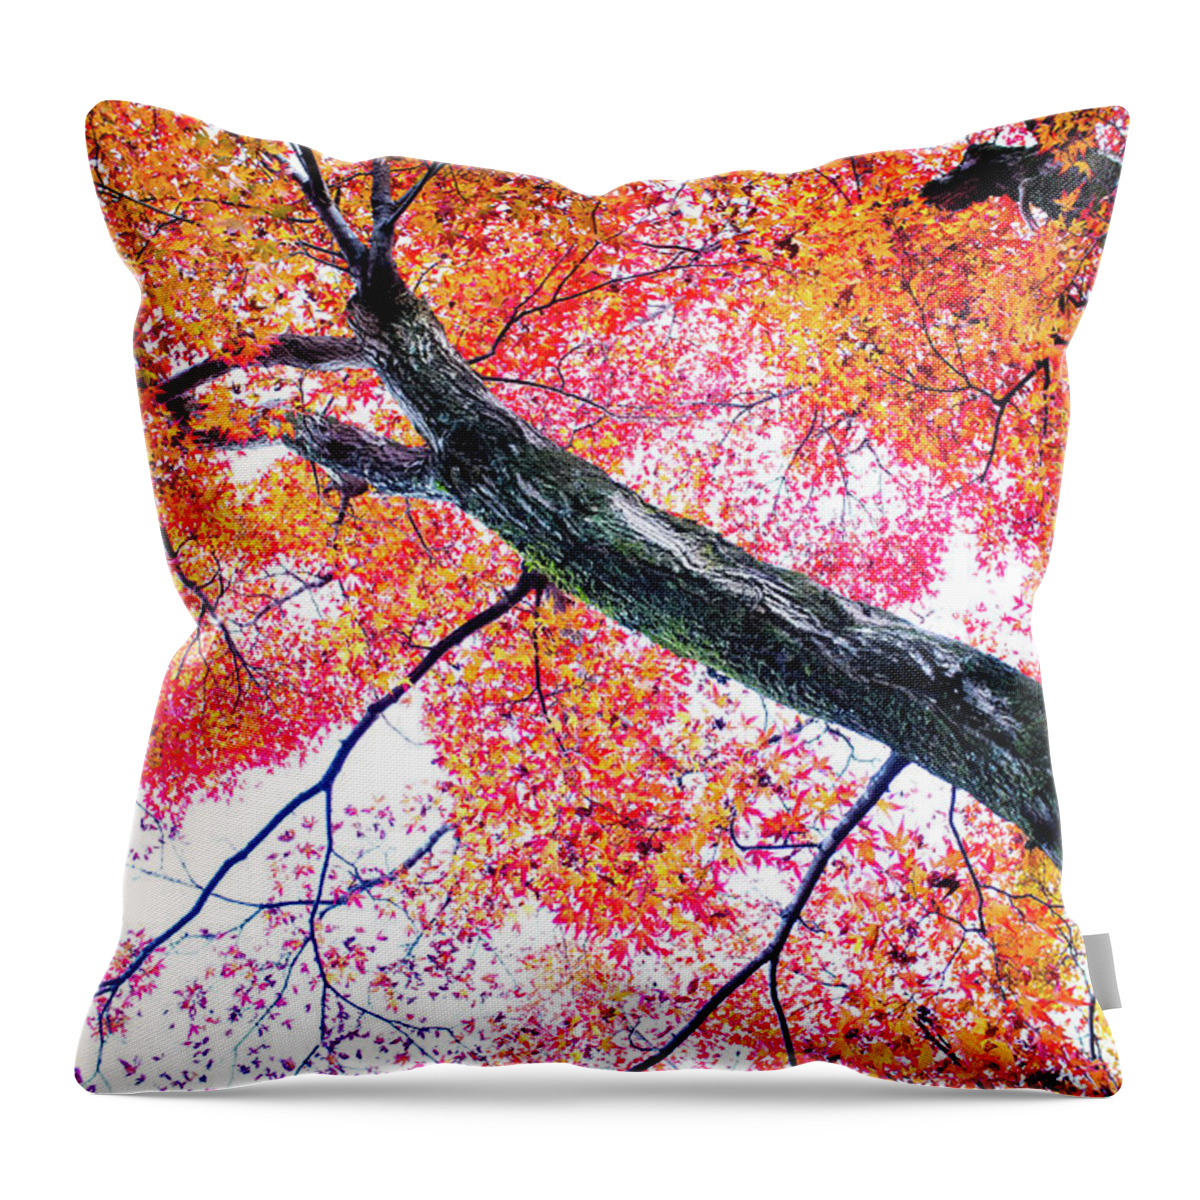 Tranquility Throw Pillow featuring the photograph Red Autumn Leaves Against Cloudy Sky by Marser